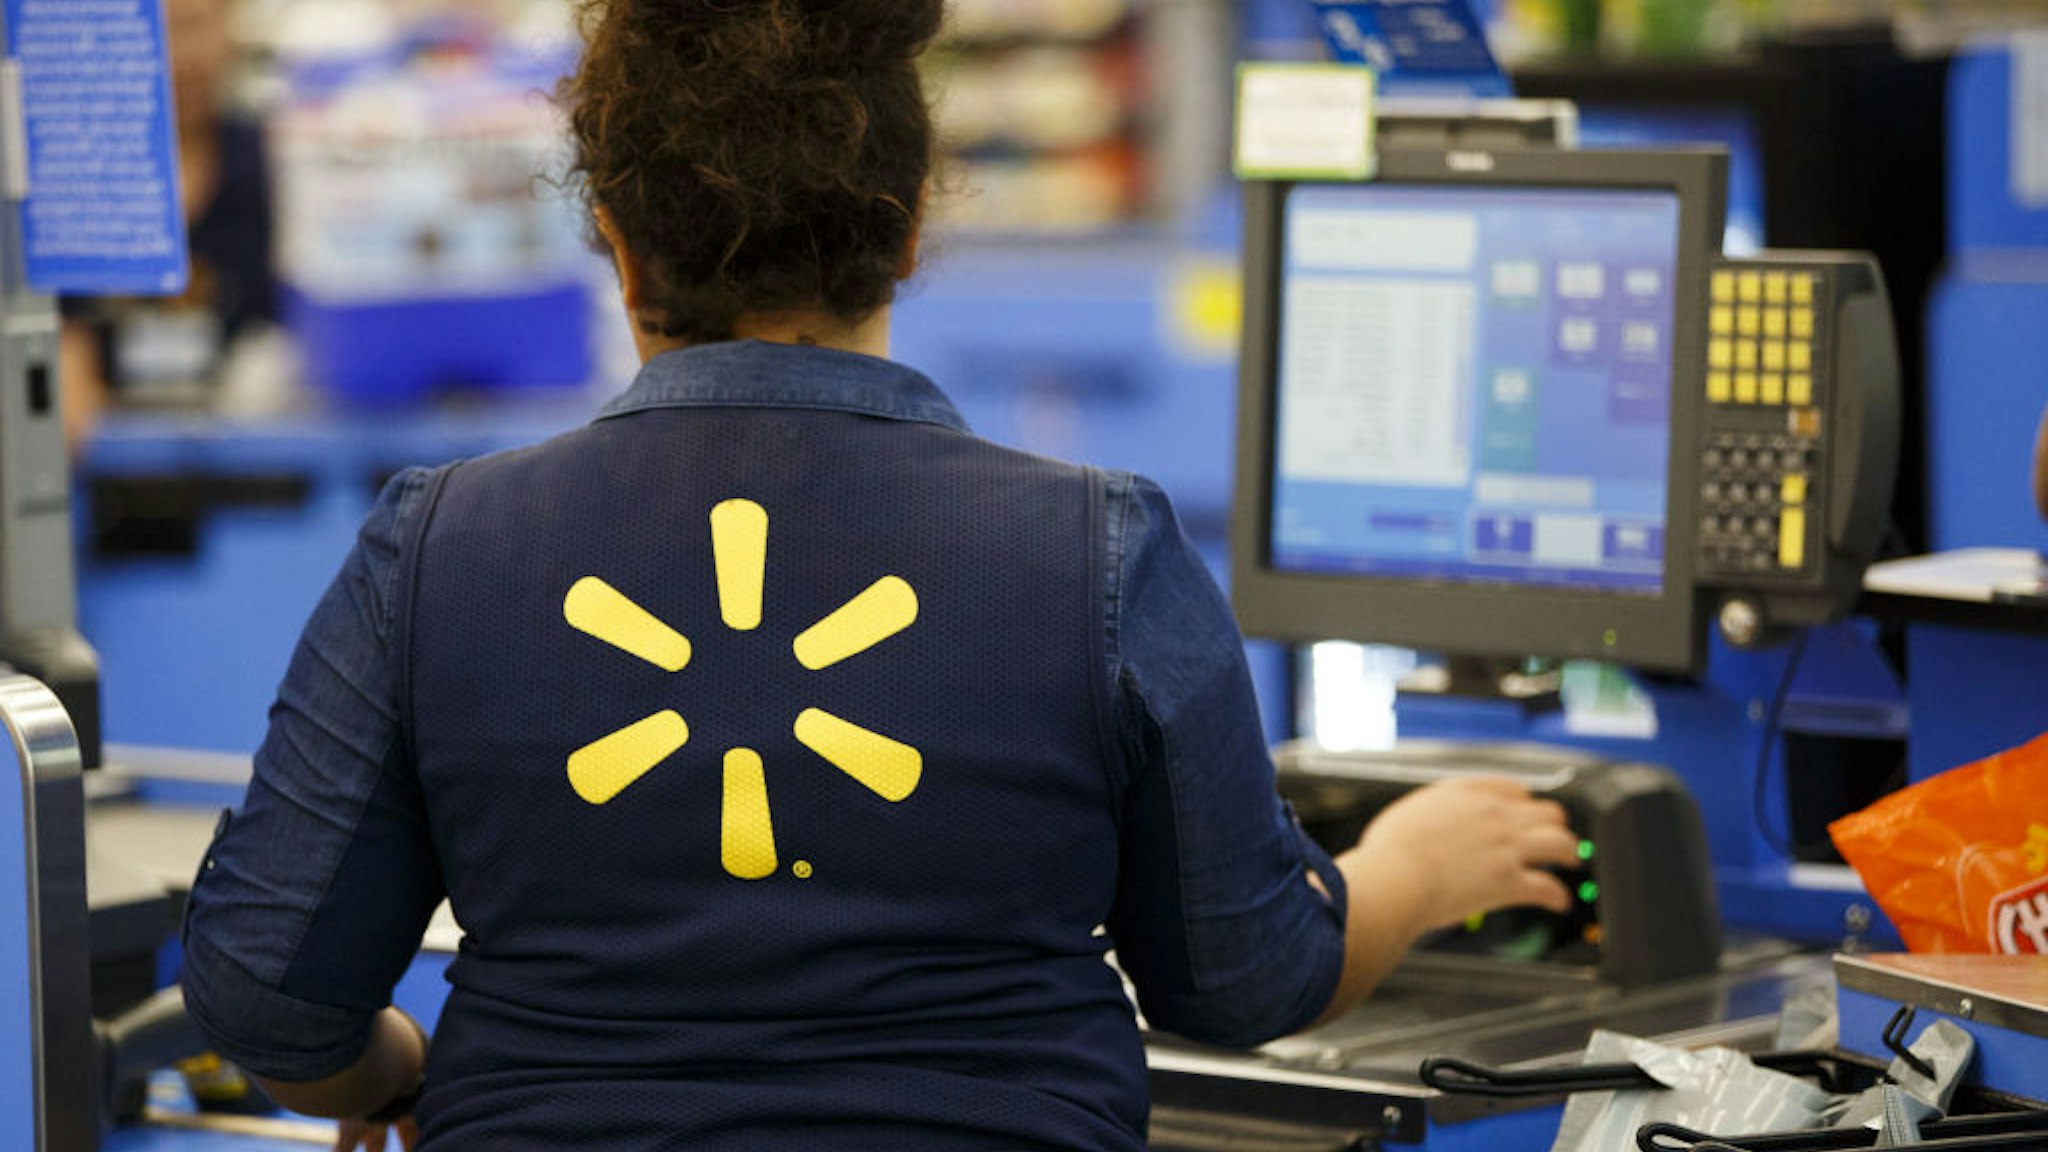 An employee scans items at a cash register at a Wal-Mart Stores Inc. location in Burbank, California, U.S., on Tuesday, Aug. 8, 2017. Wal-Mart Stores is scheduled to release earnings figures on August 17. Photographer: Patrick T. Fallon/Bloomberg via Getty ImagesAn employee scans items at a cash register at a Wal-Mart Stores Inc. location in Burbank, California, U.S., on Tuesday, Aug. 8, 2017. Wal-Mart Stores is scheduled to release earnings figures on August 17. Photographer: Patrick T. Fallon/Bloomberg via Getty Images